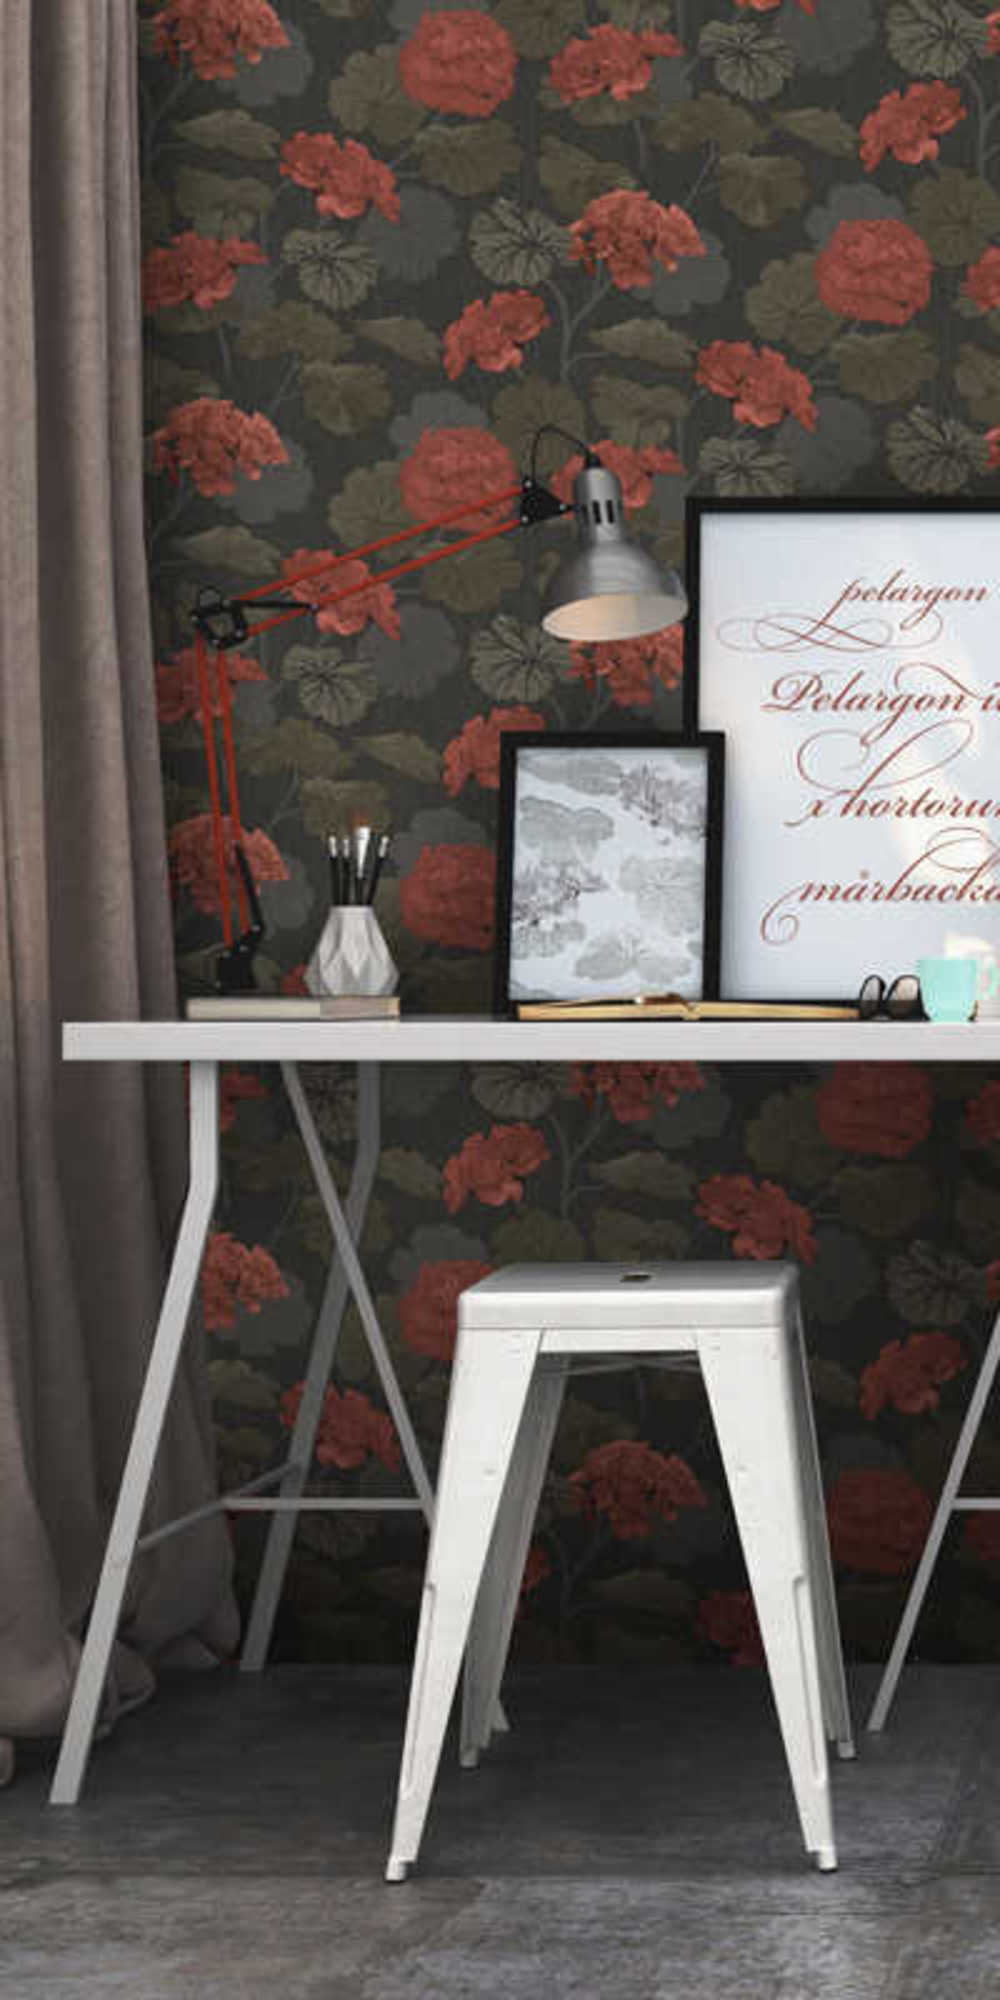 Behang Dutch Wallcoverings Passion 37006